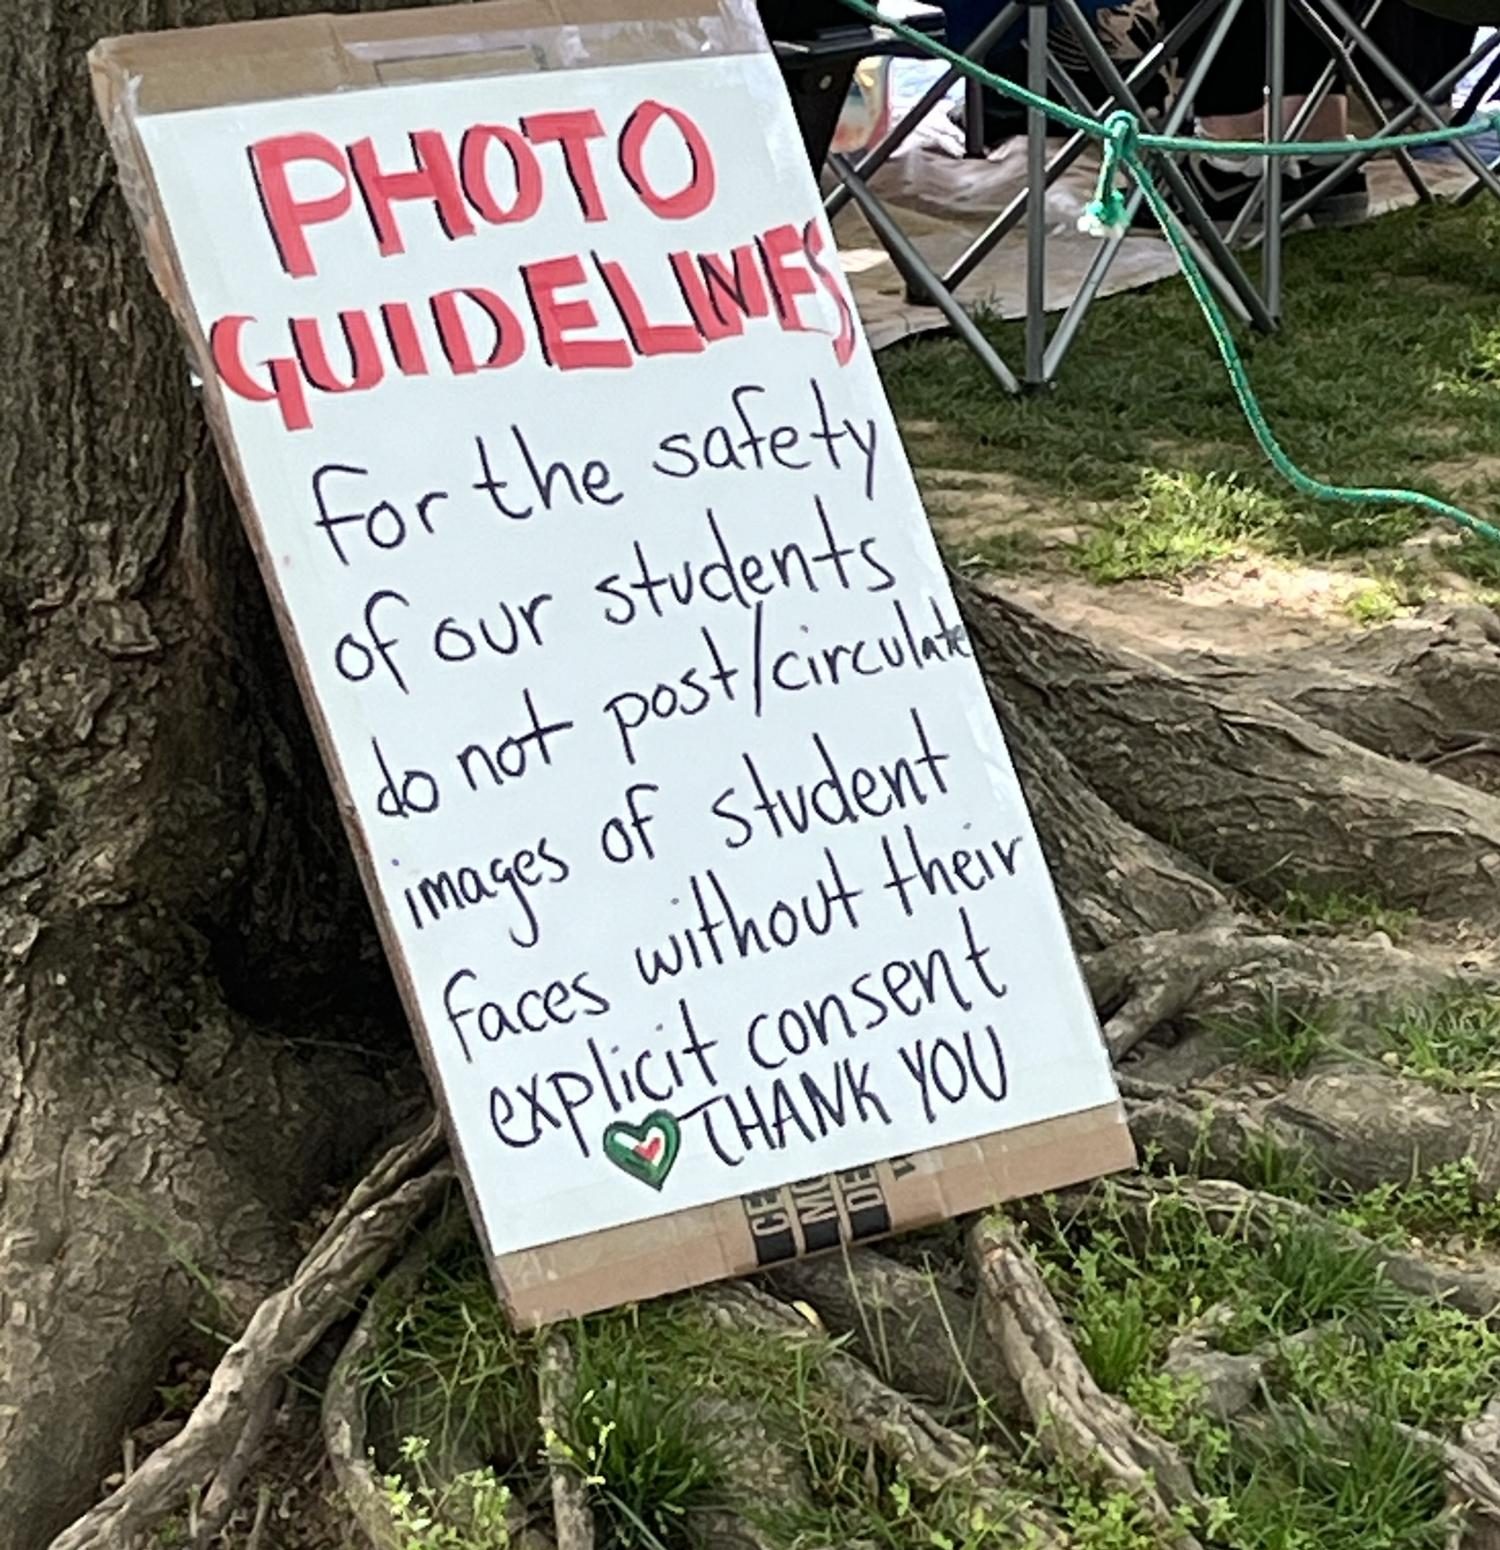 Photo guidelines that the Princeton pro-Palestine encampment has created.